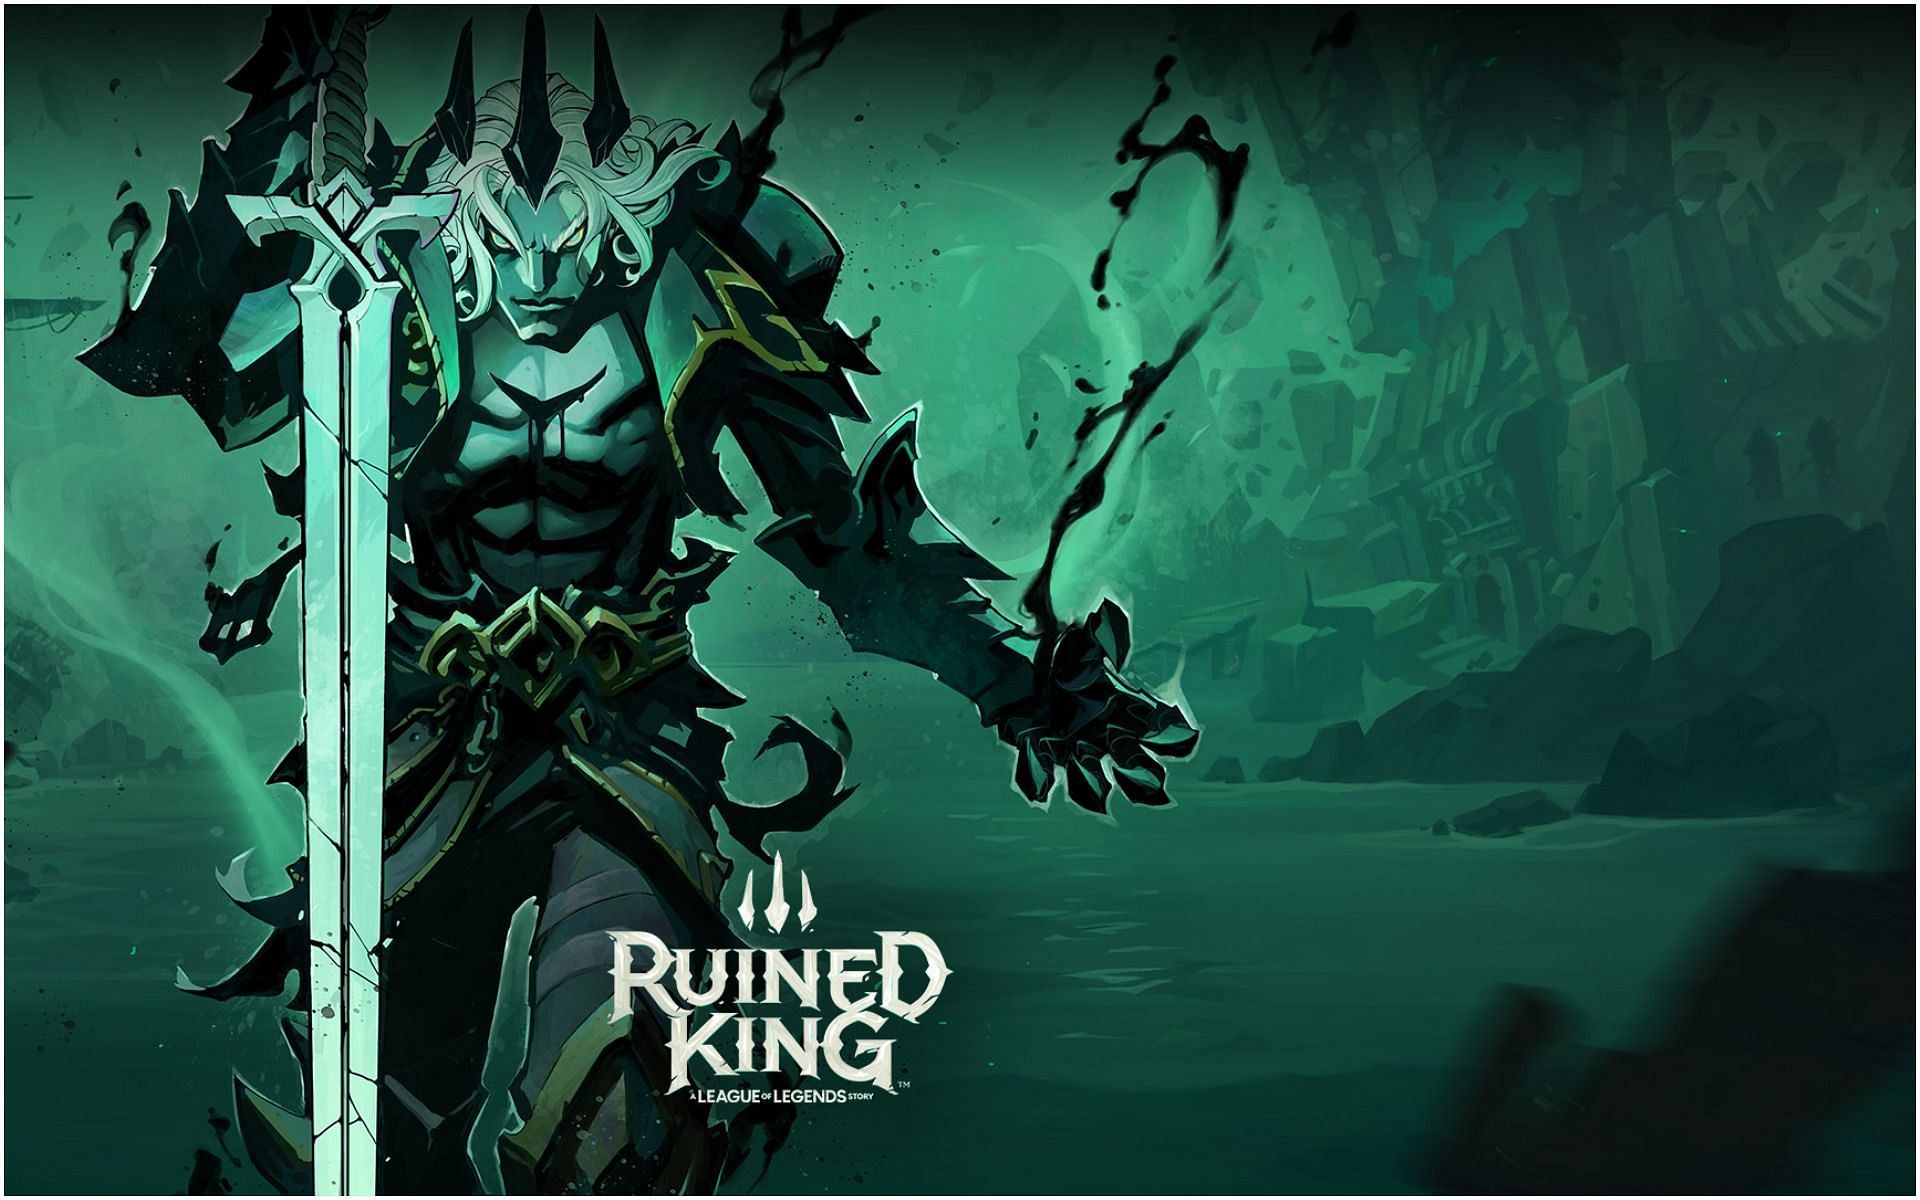 Ruined King: A League of Legends Story System Requirements - Can I